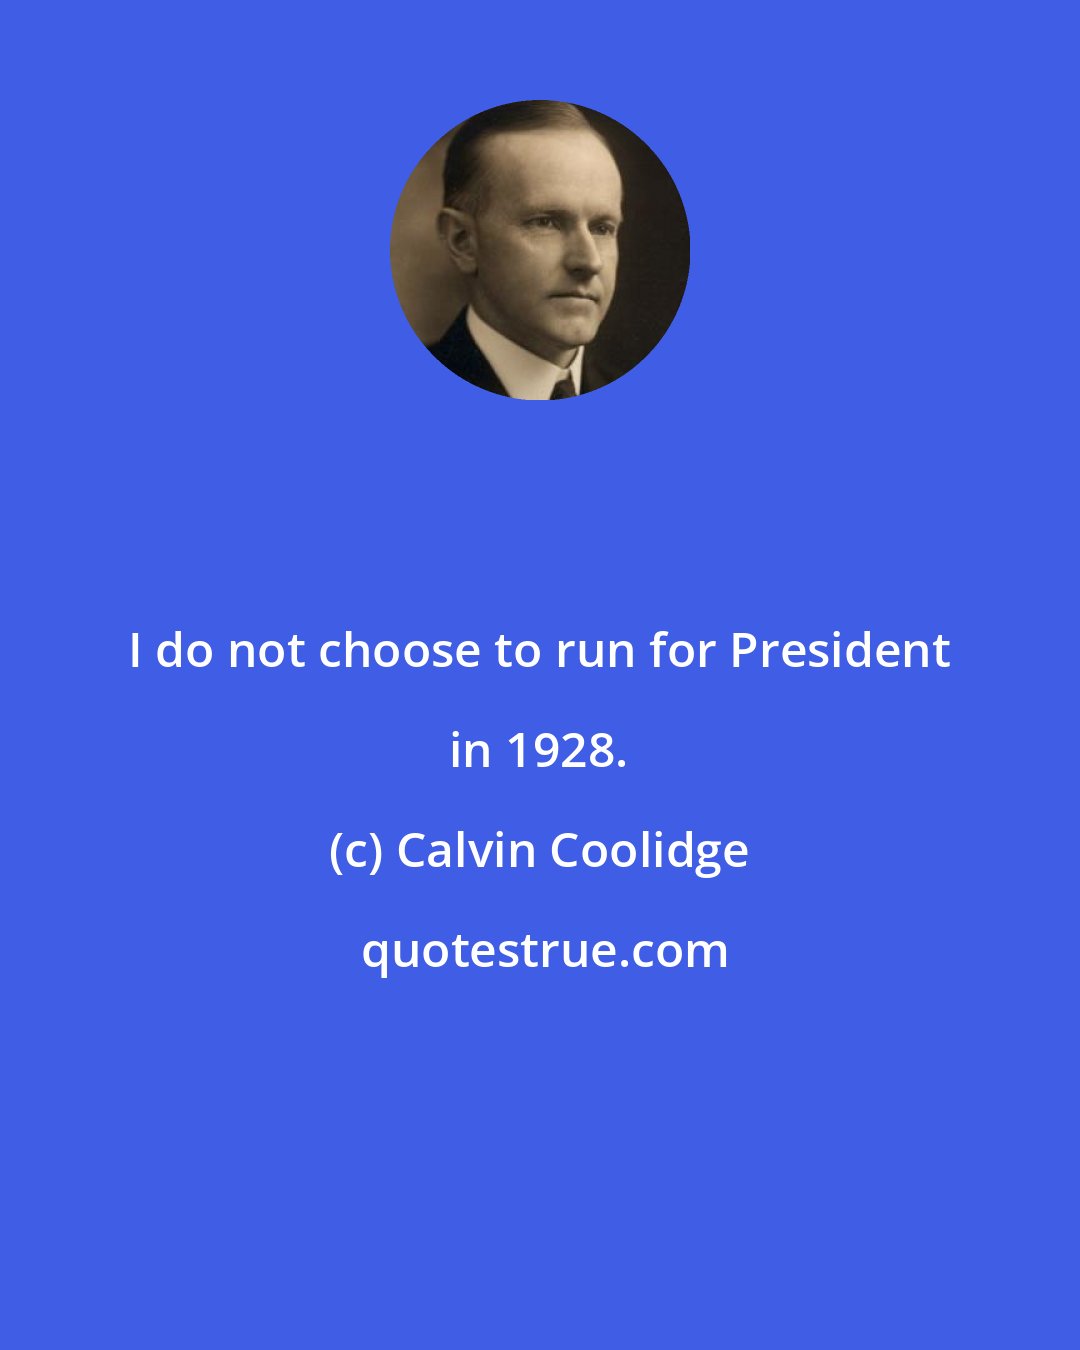 Calvin Coolidge: I do not choose to run for President in 1928.